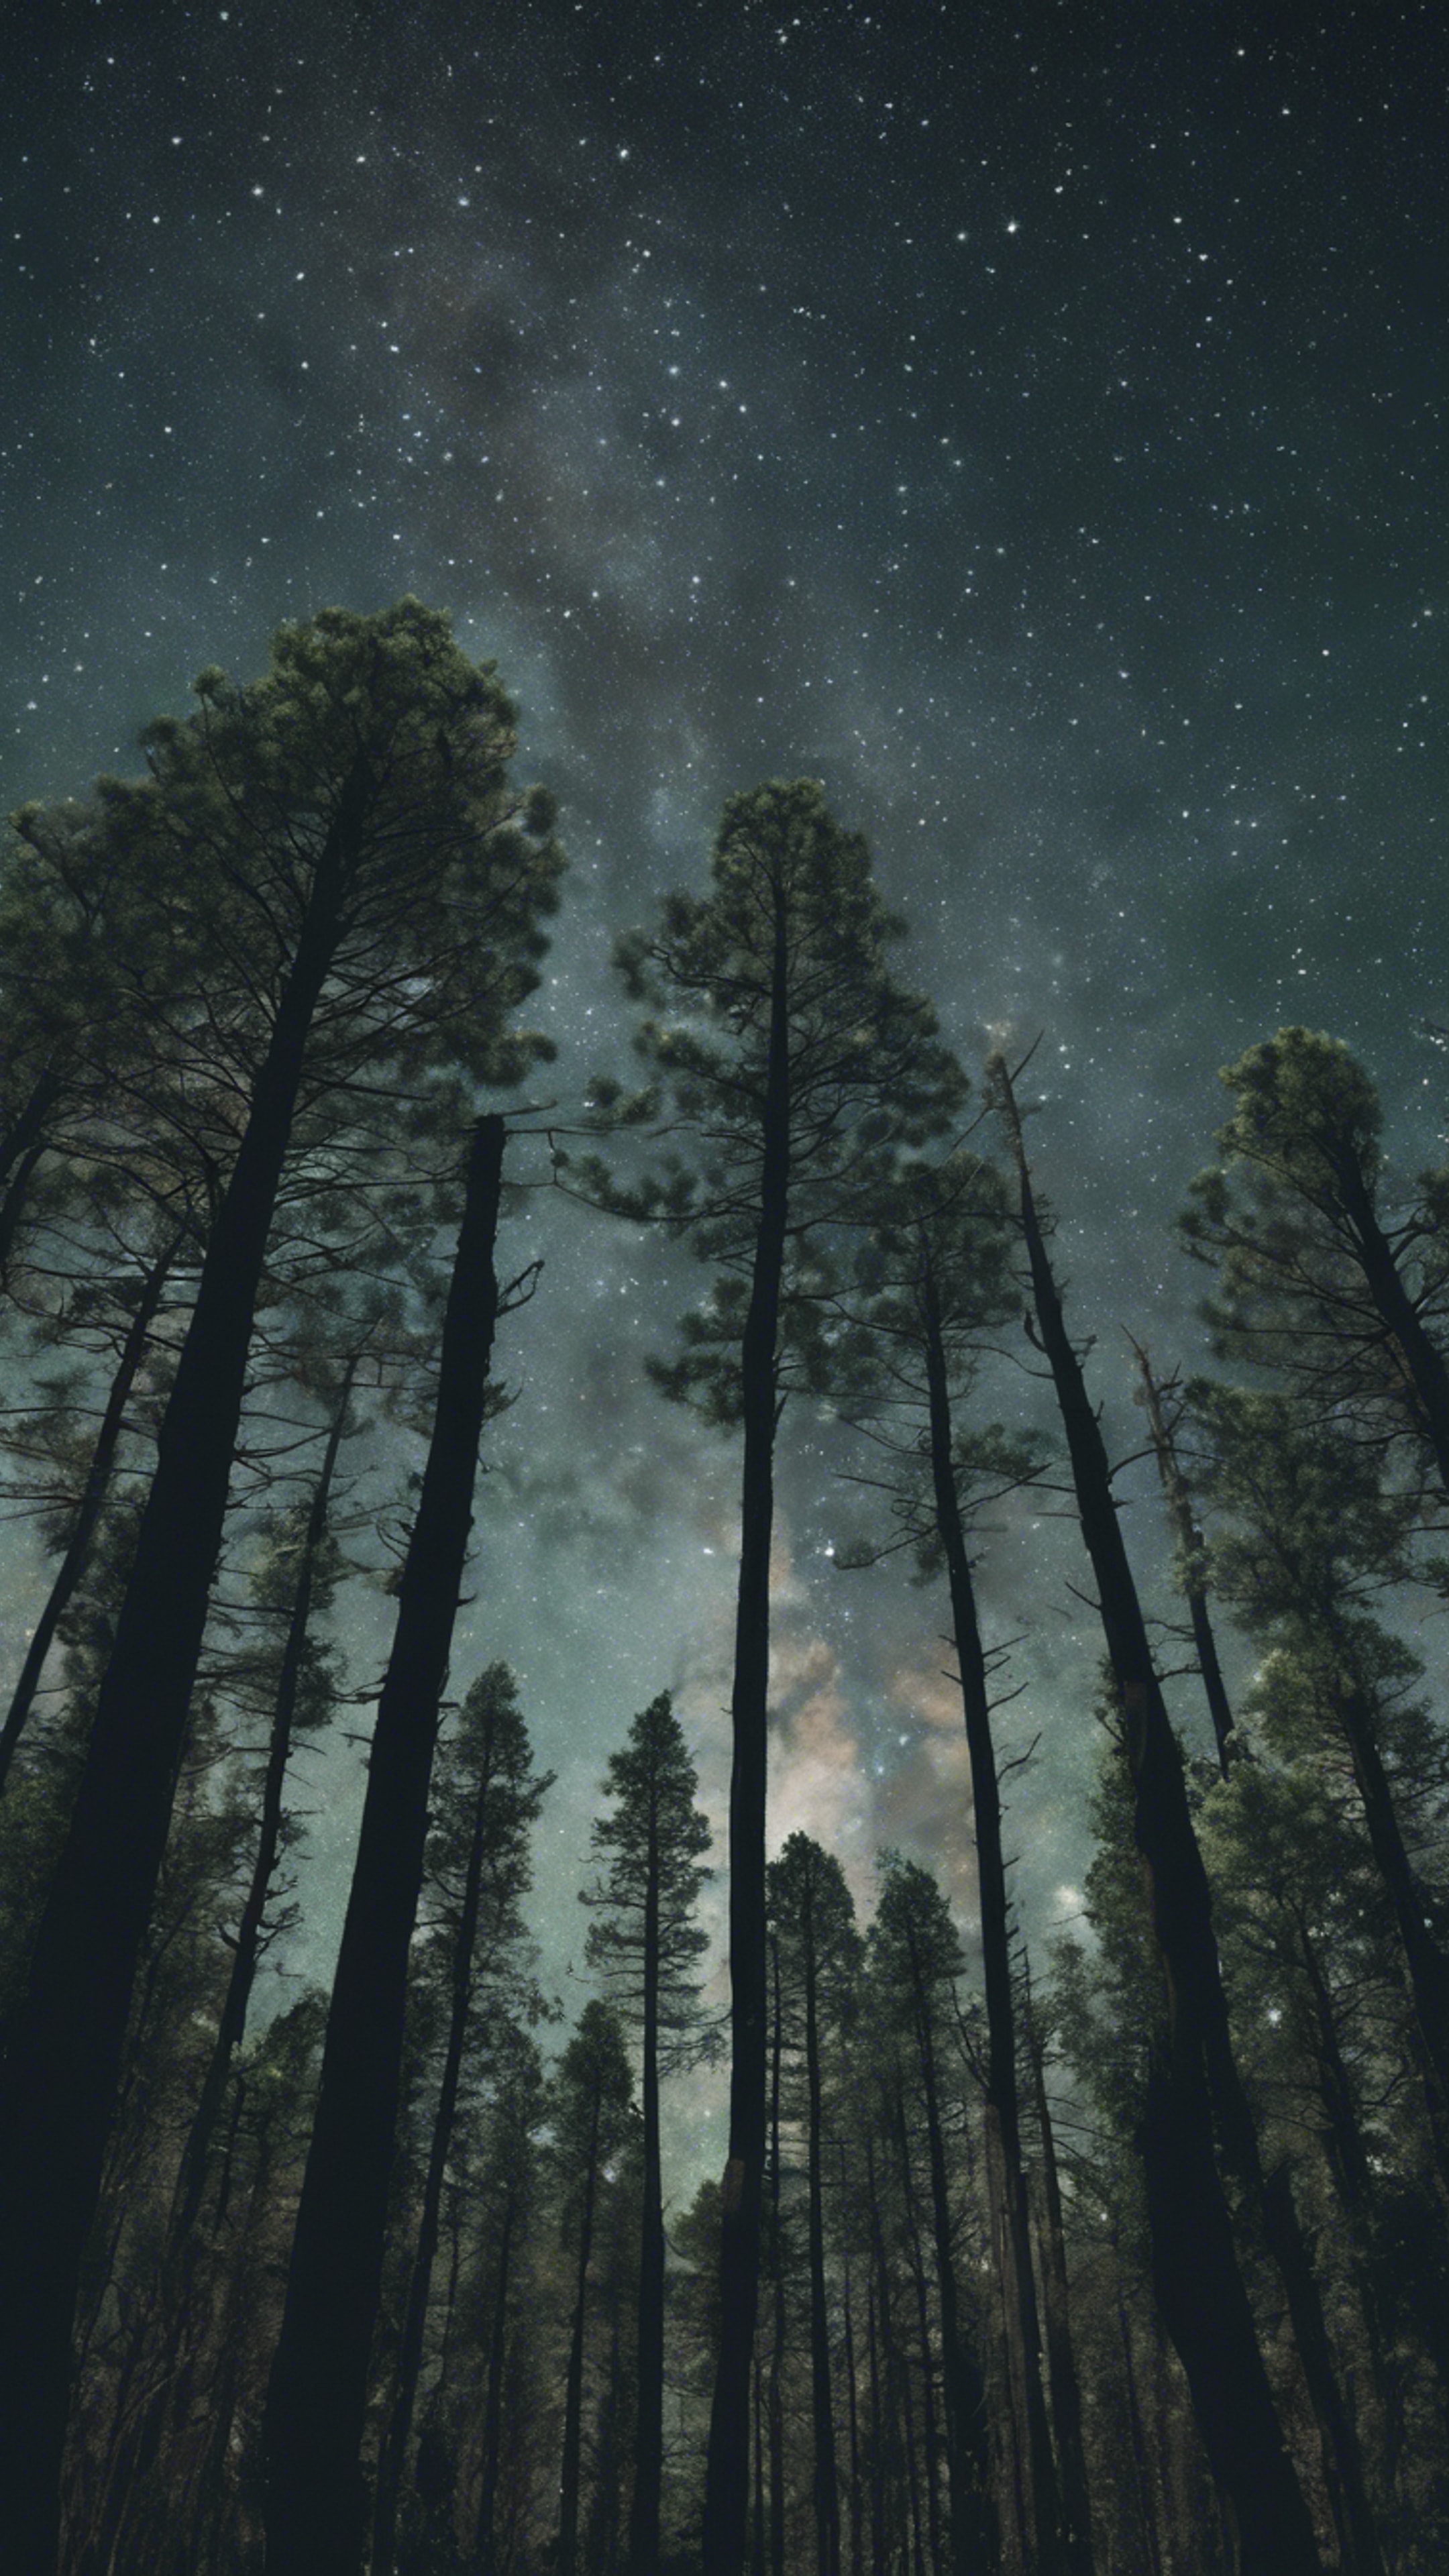 A wilderness scene with tall, dark green pine trees occluding the stars. Tapeta[a450718e497a48169b60]